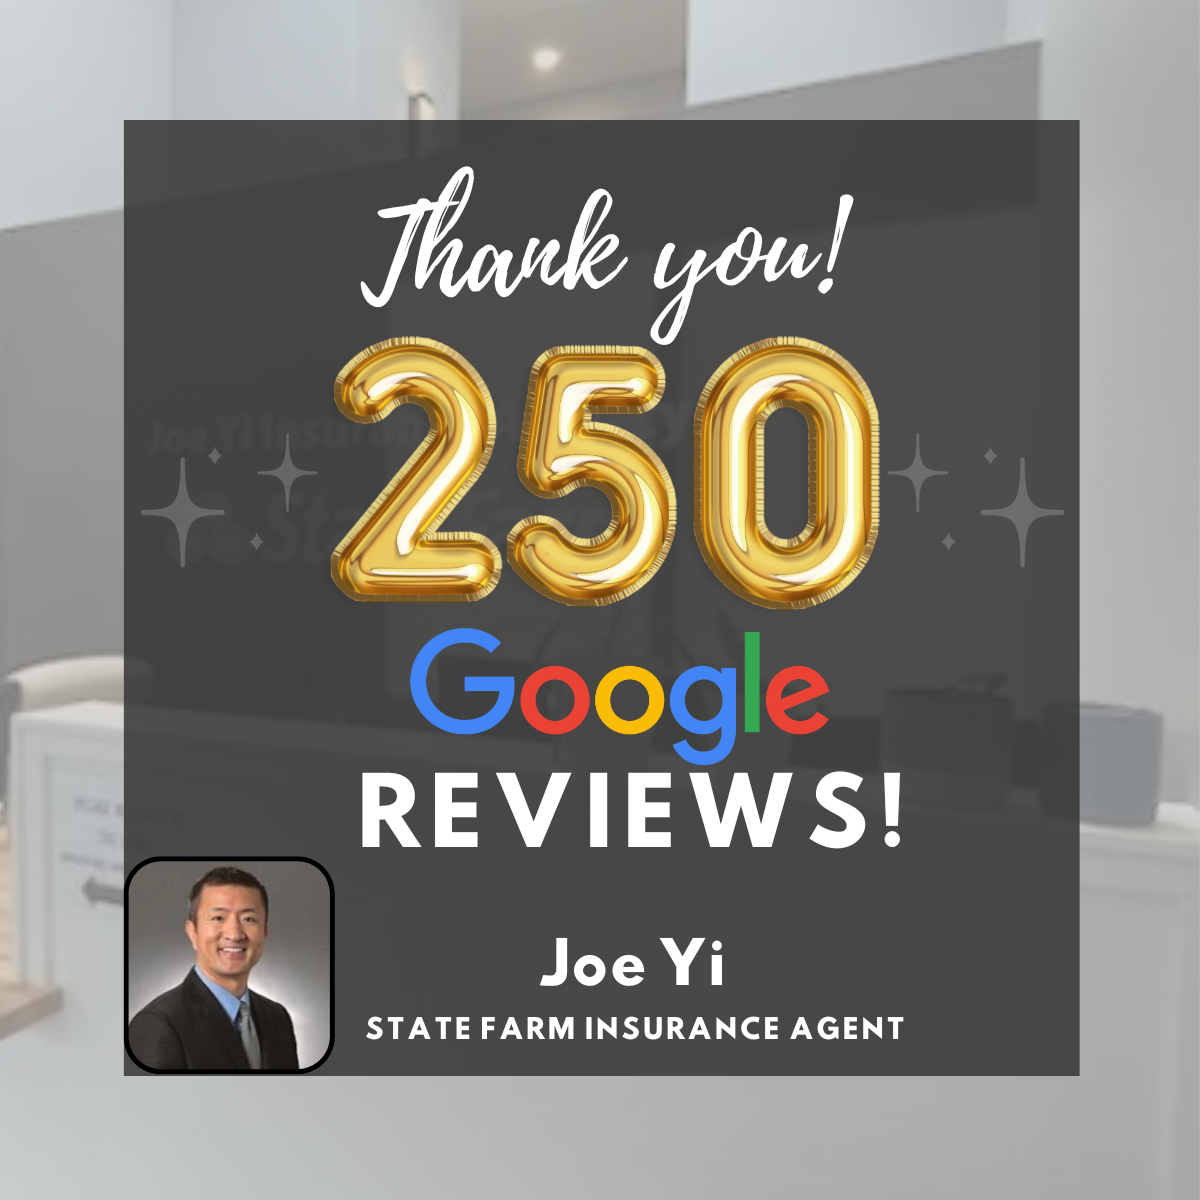 Thank you to our wonderful customers for 250 Google Reviews! We are so grateful for you all!